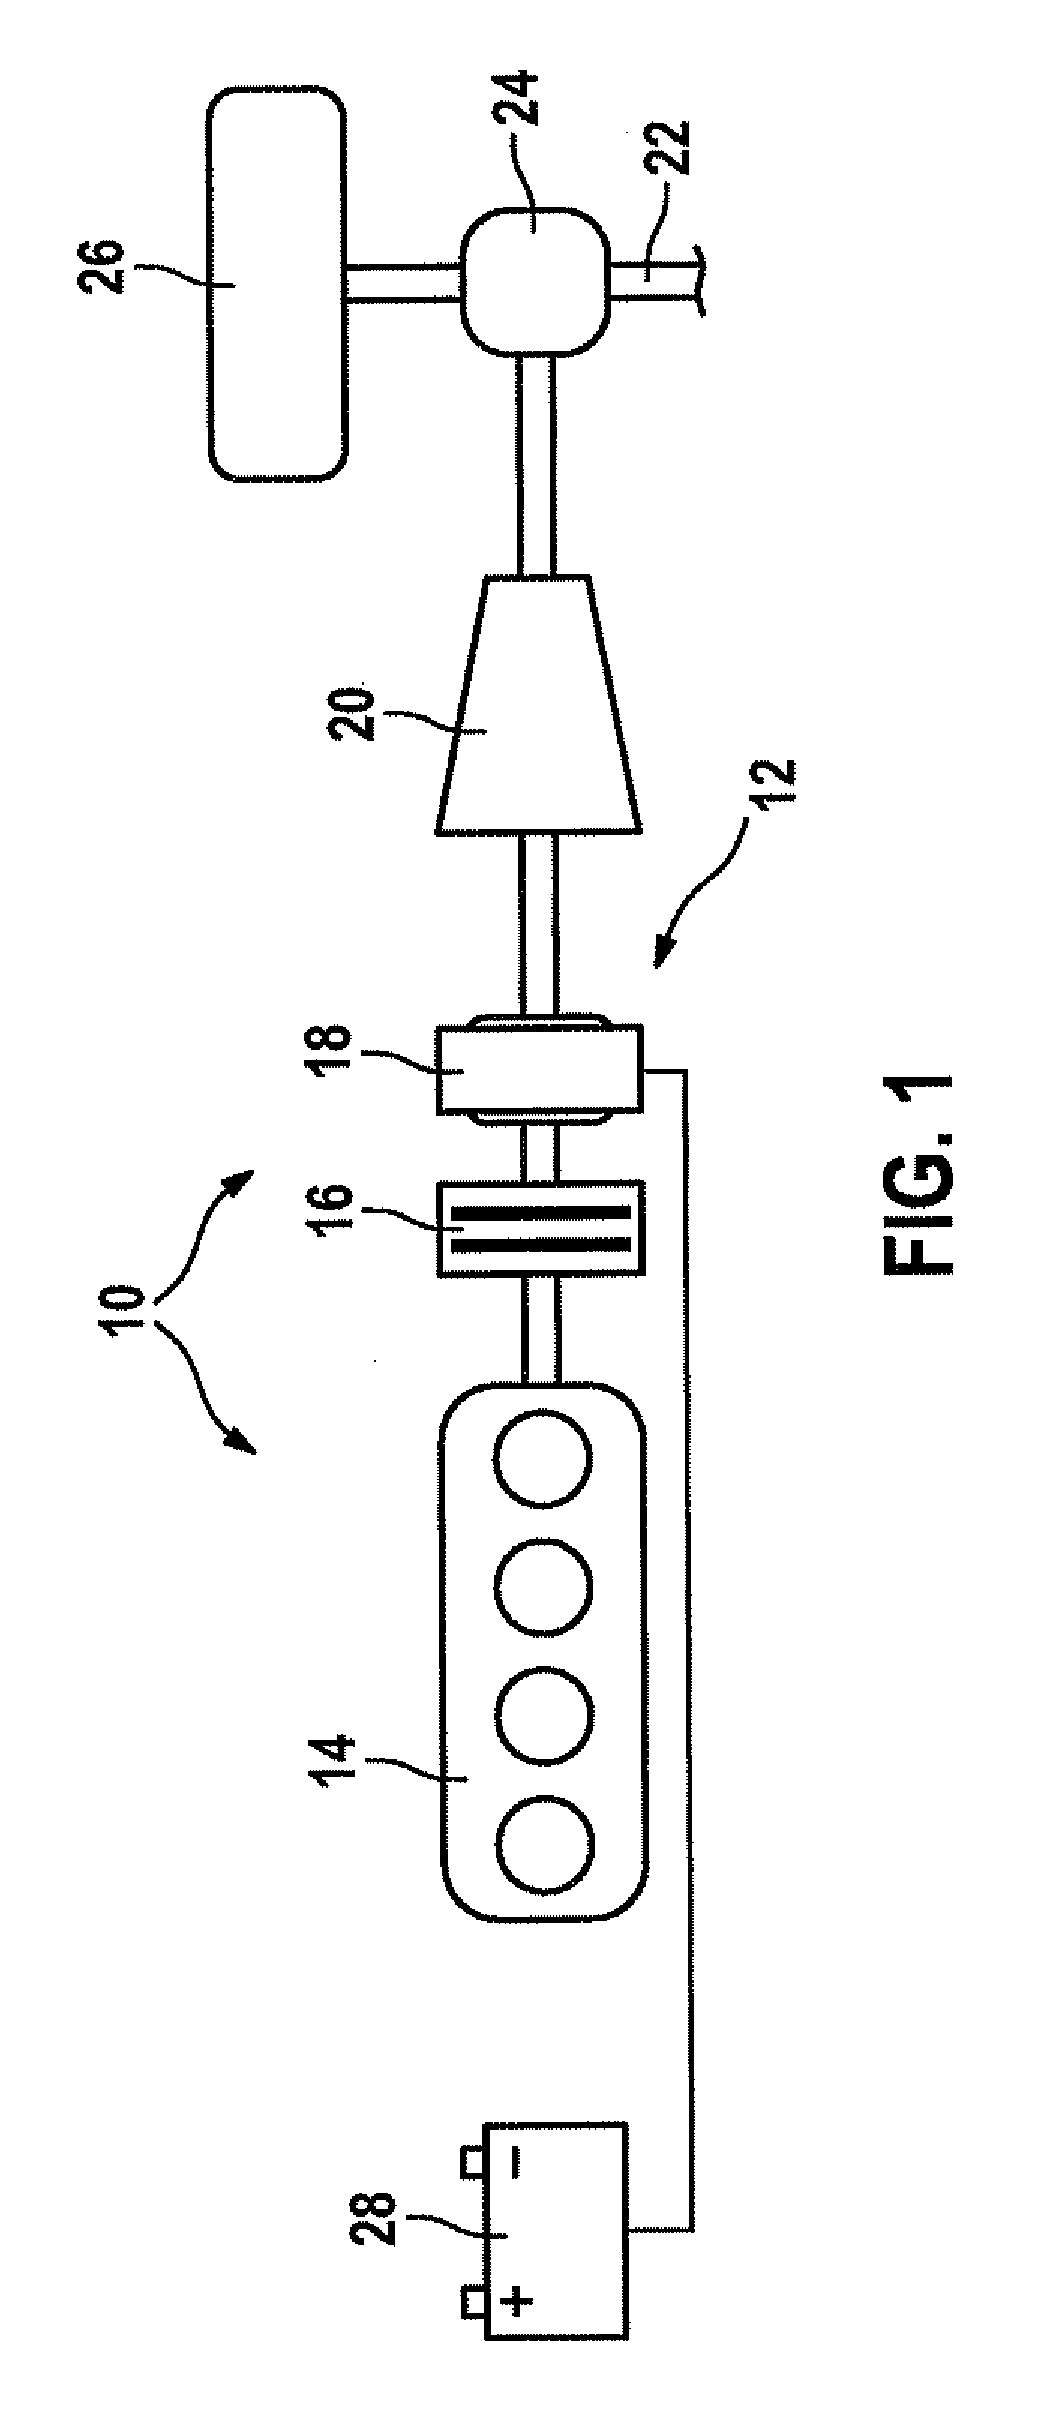 Hybrid drive having a separating clutch which assists a direct start